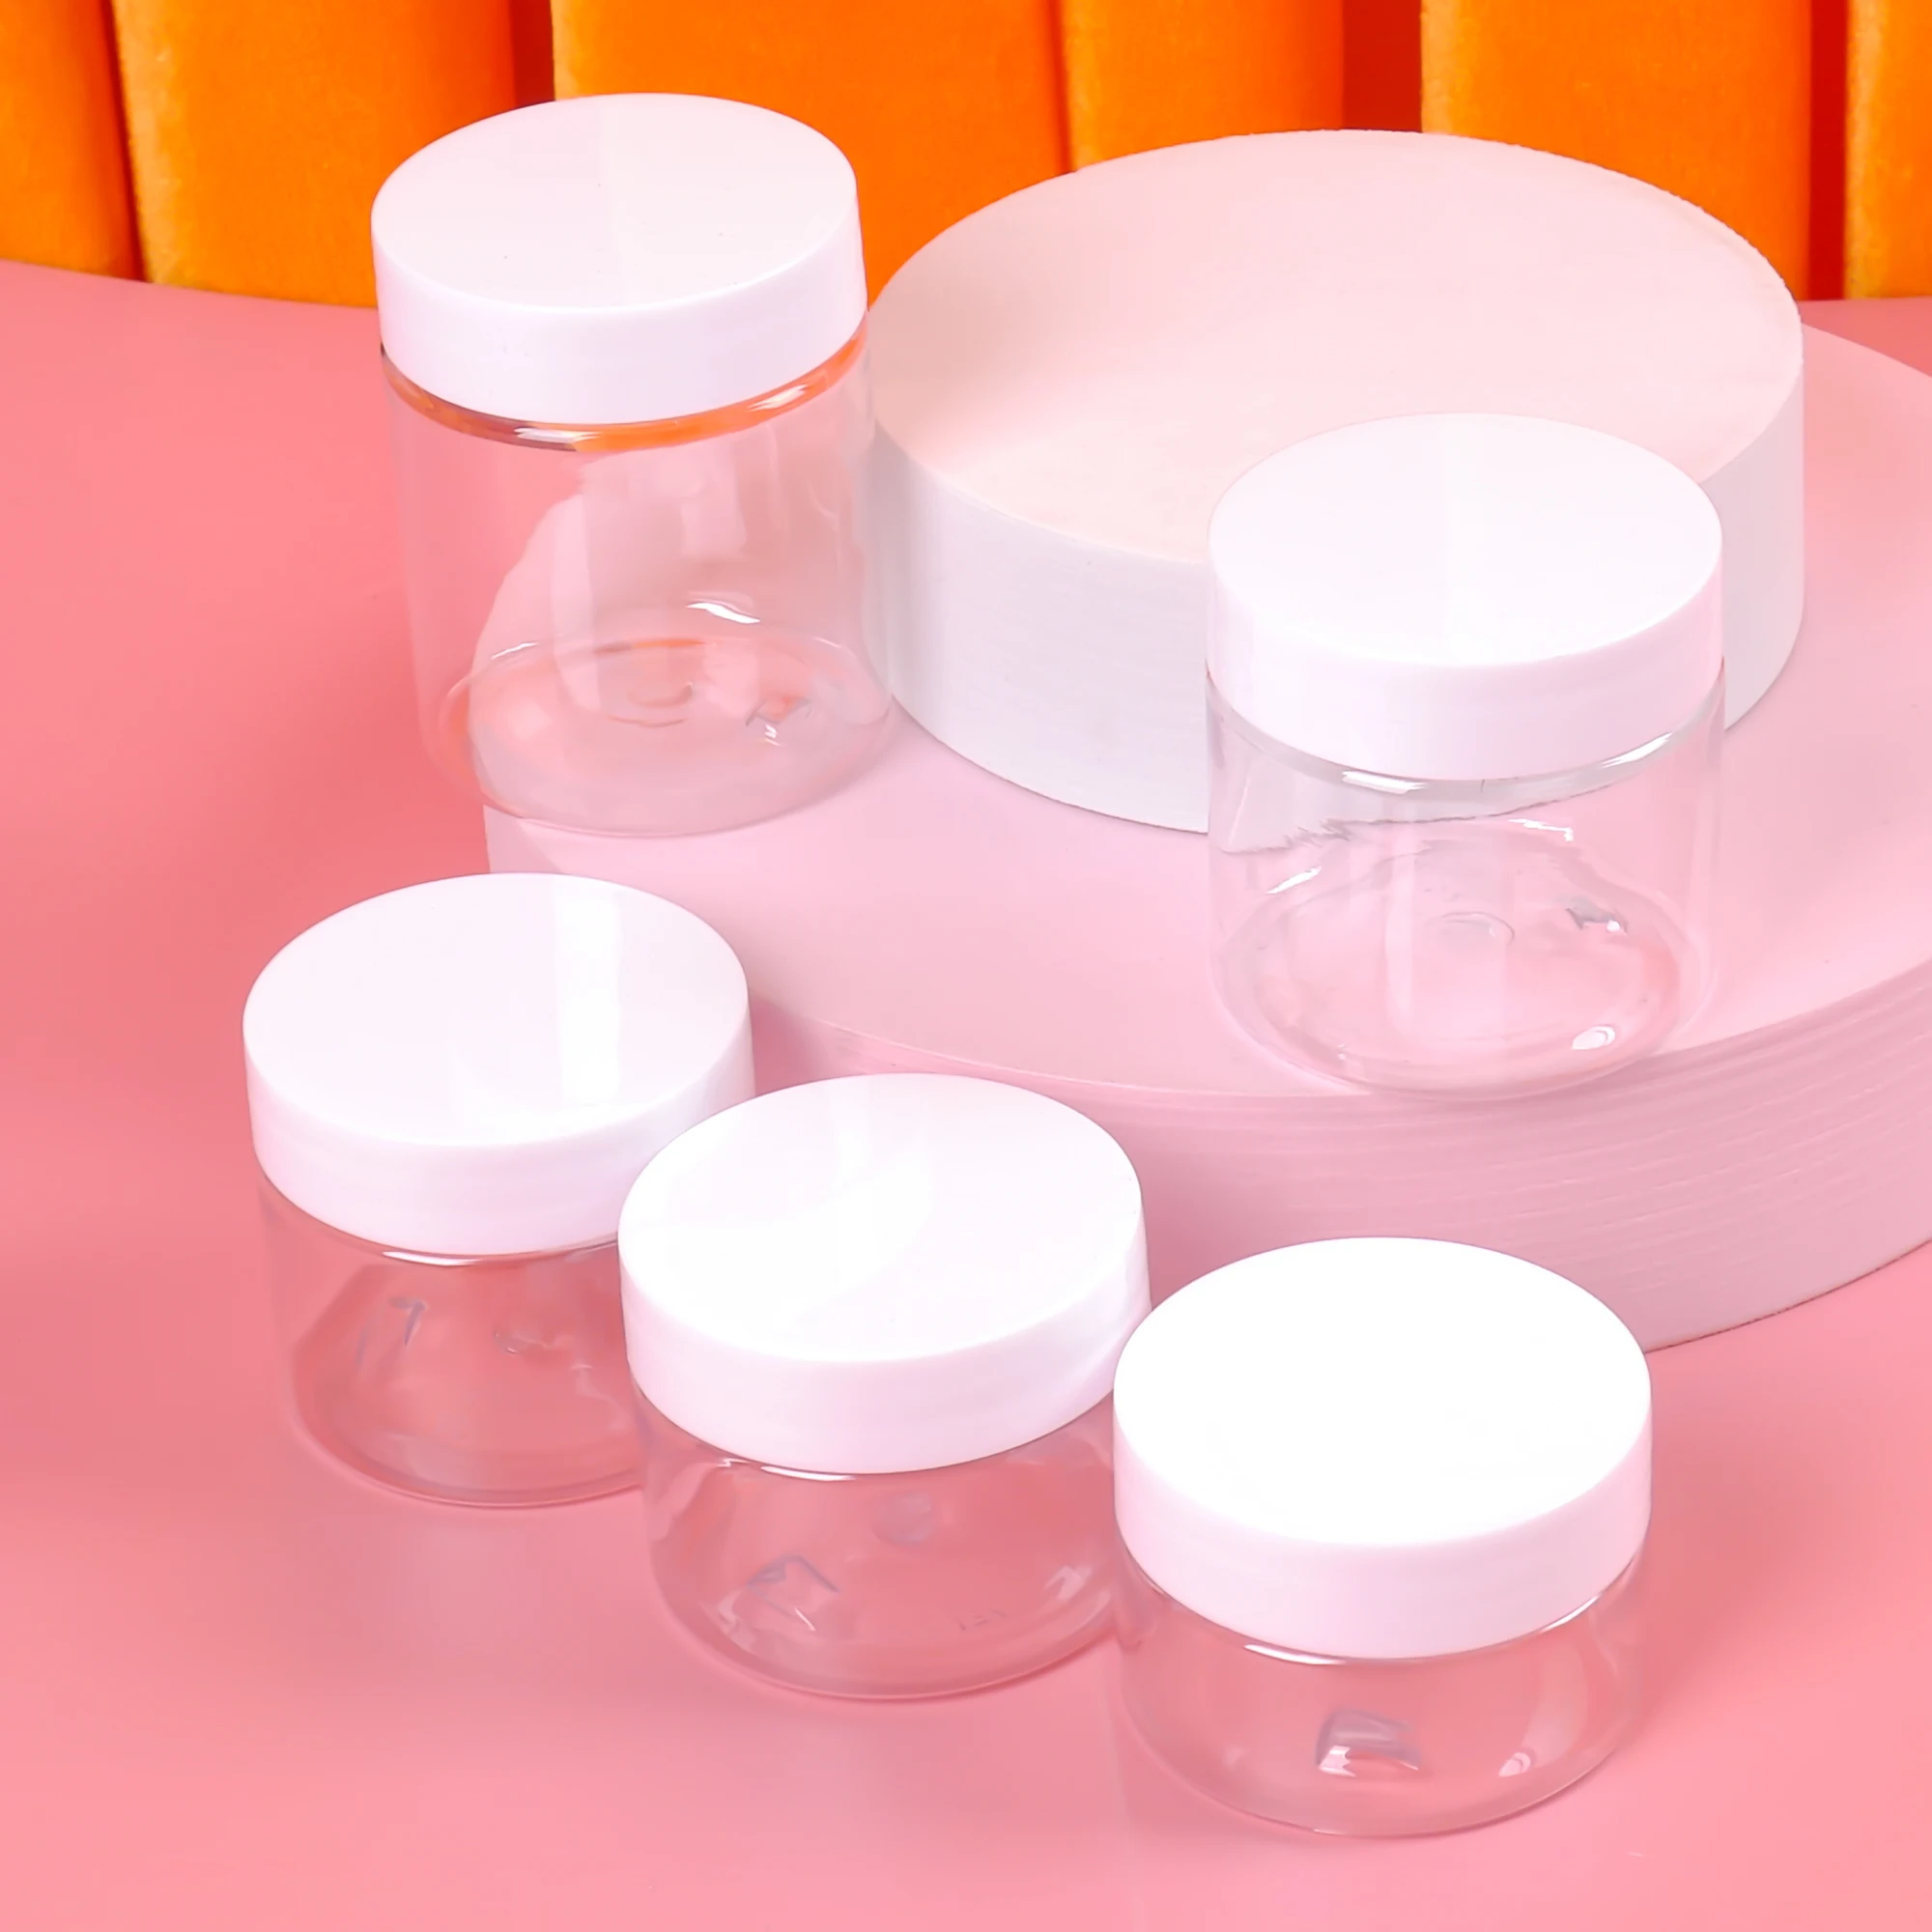 

30ml/40ml/50ml/60ml/80ml Clear Plastic Jar with Lids Refillable Empty Cosmetic Containers Jar for Travel Storage Make Up Bottle